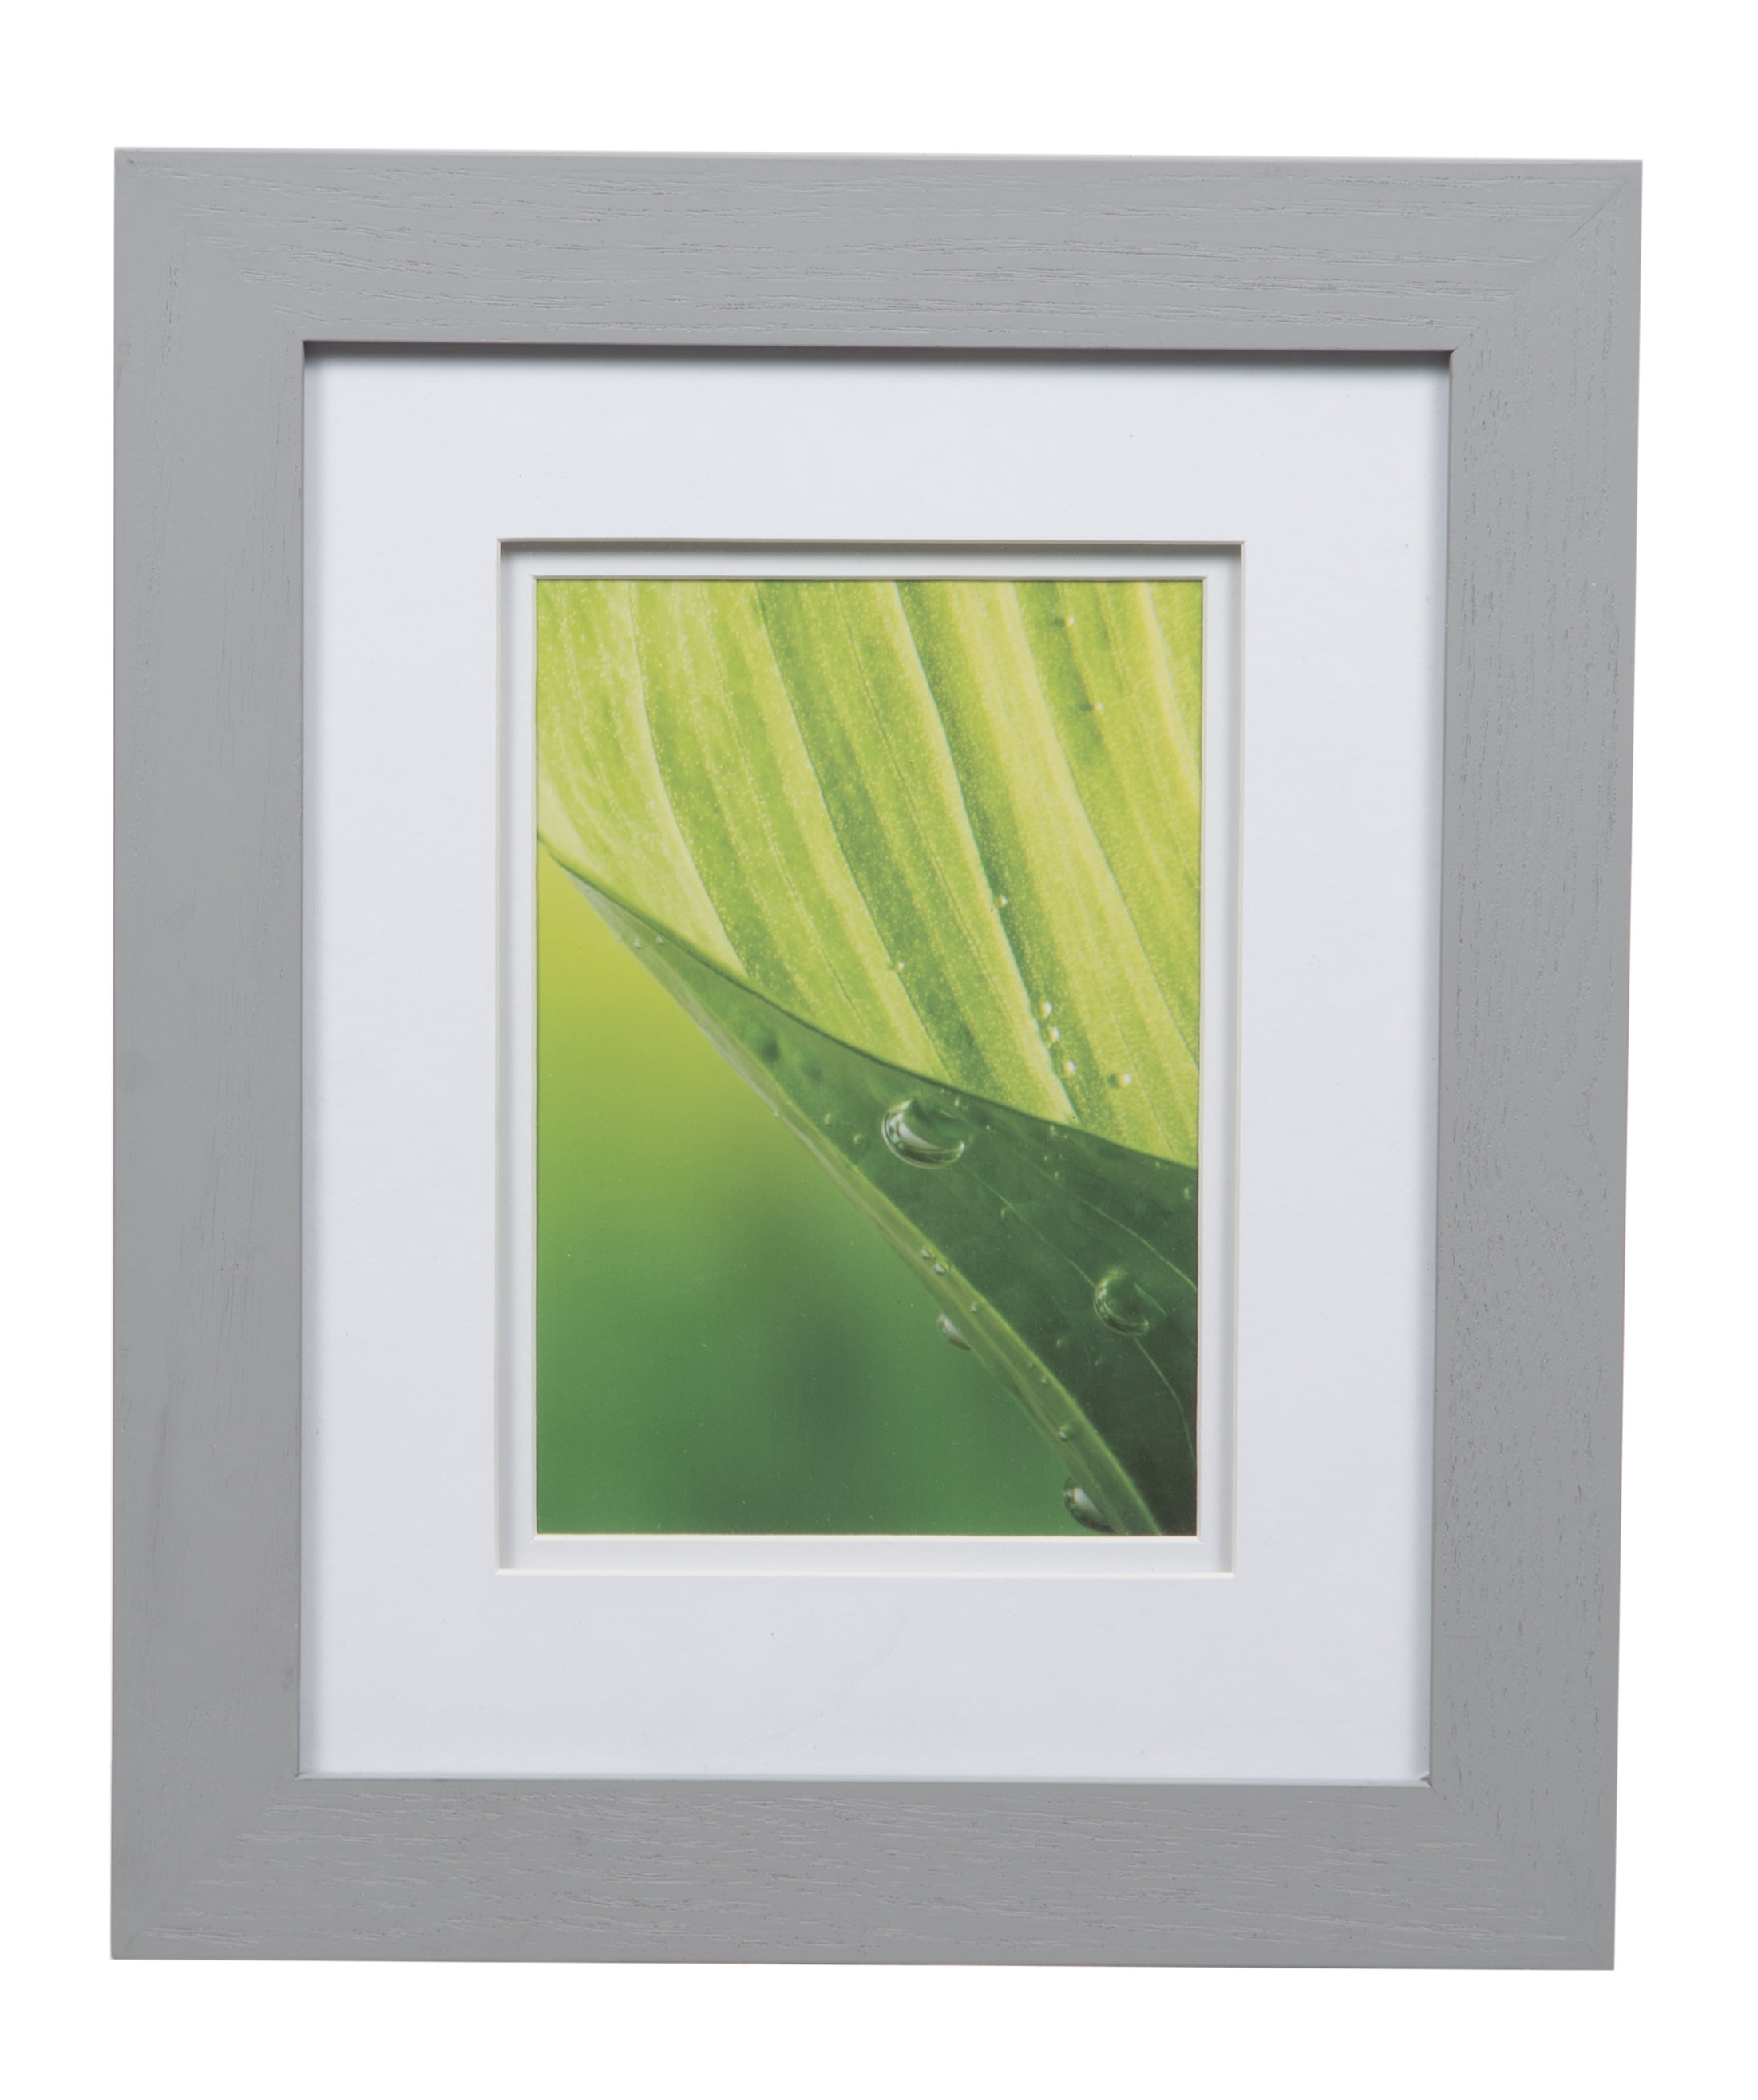 11"x14" Flat Grey Wall Frame Display with Double White Mat for 8x10 Picture Gray 